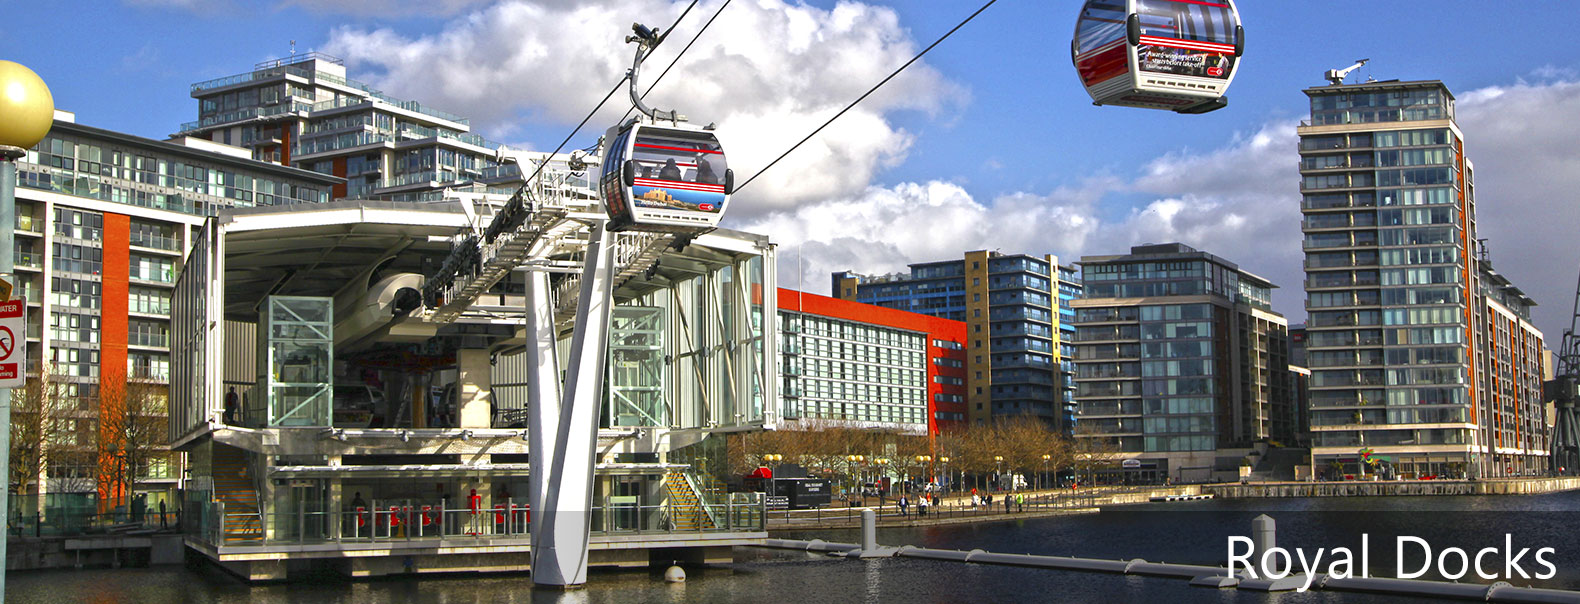 Royal Docks East London with cable car and marina